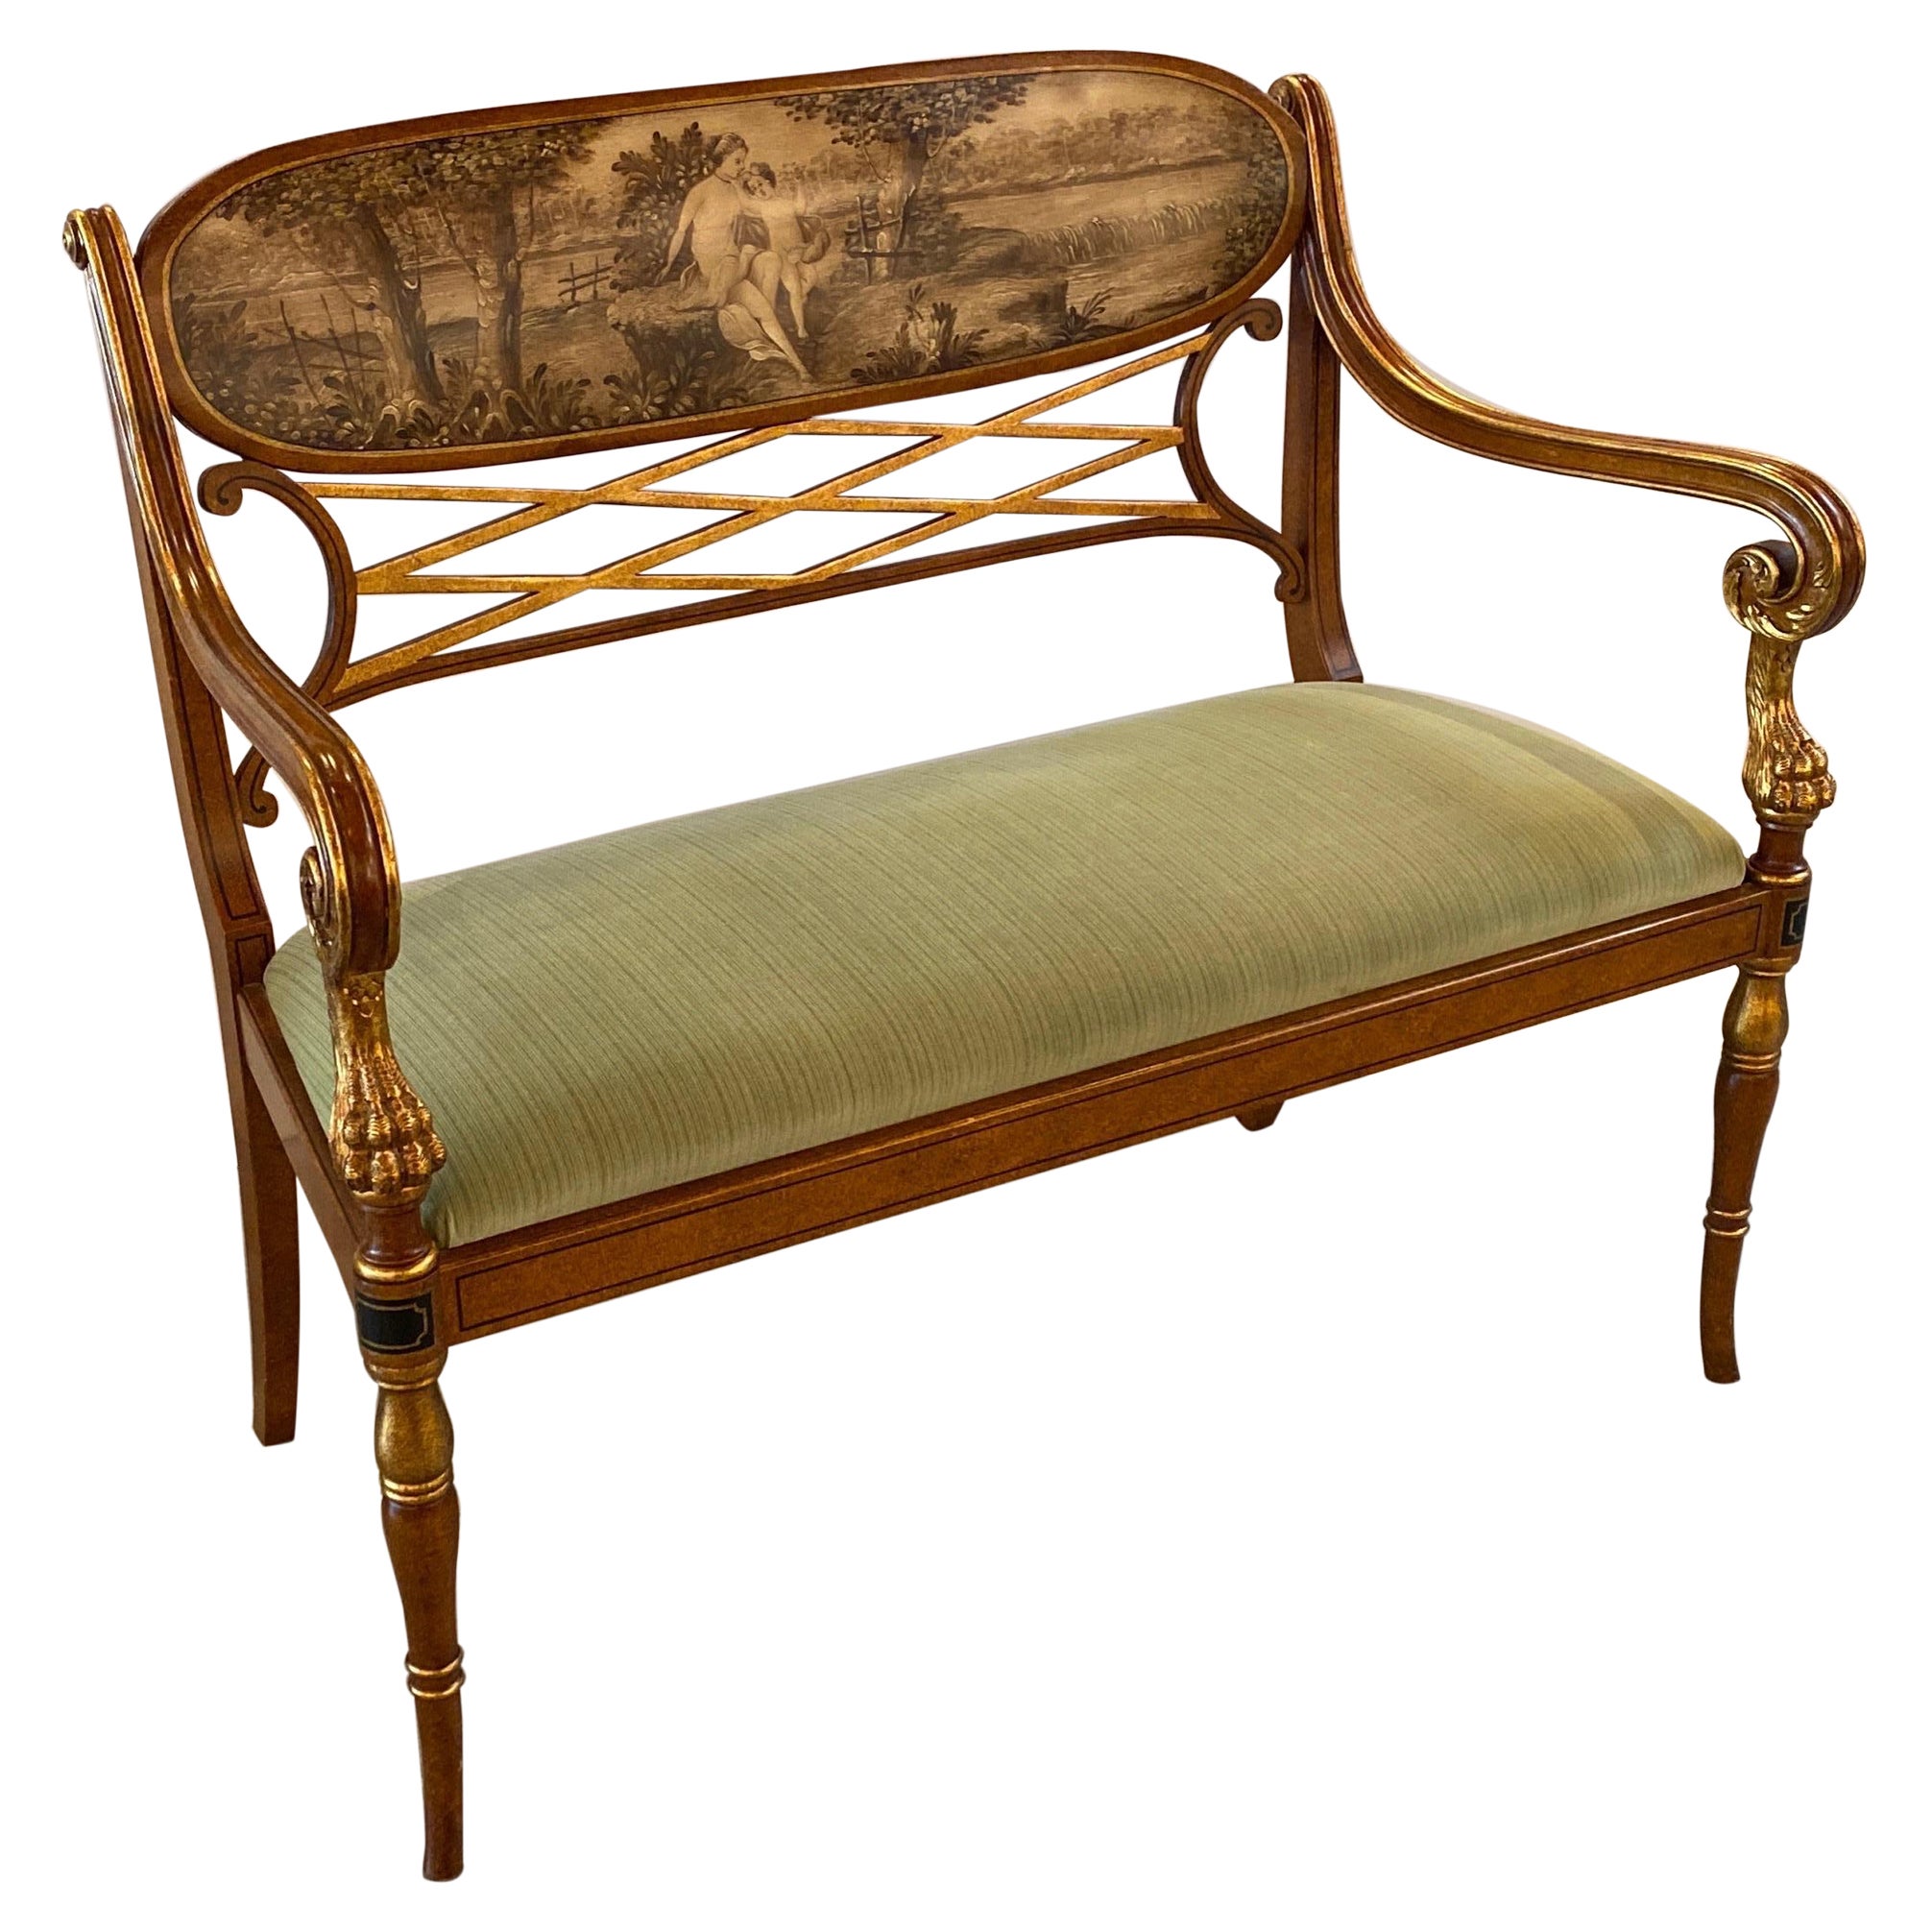 Elegant Hand Painted Continental Settee with Gilt Decoration